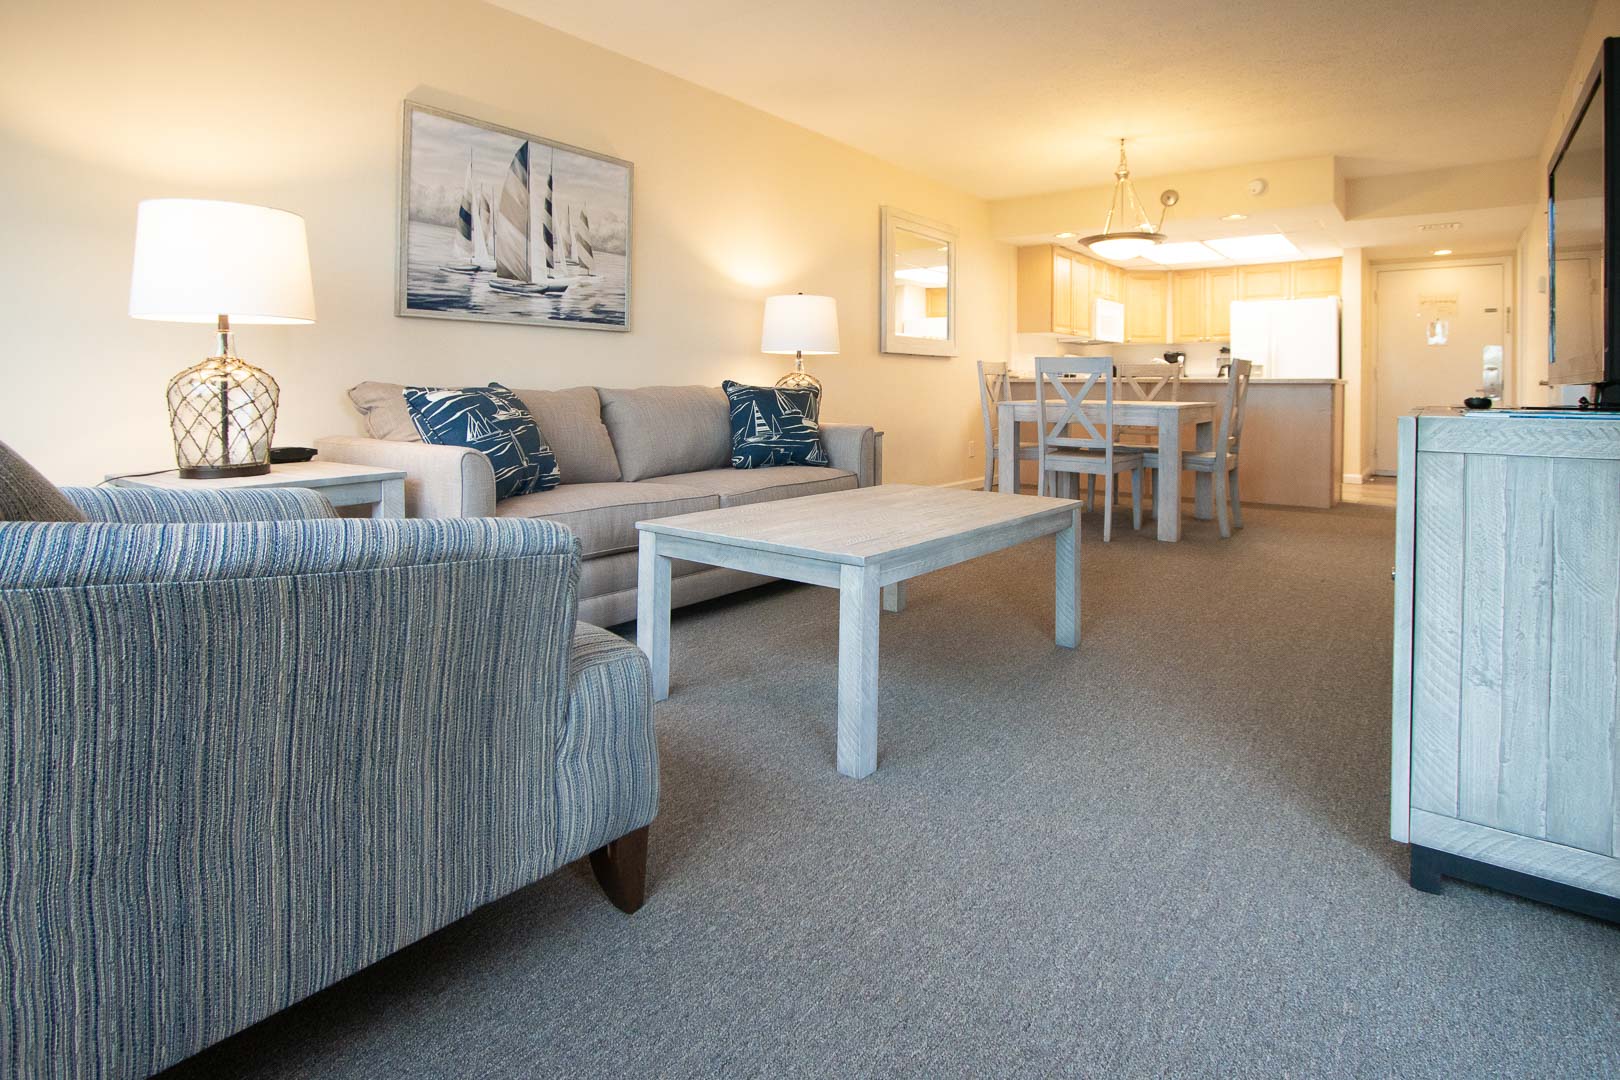 A clean living room area at VRI's Bay Club of Sandestin in Florida.